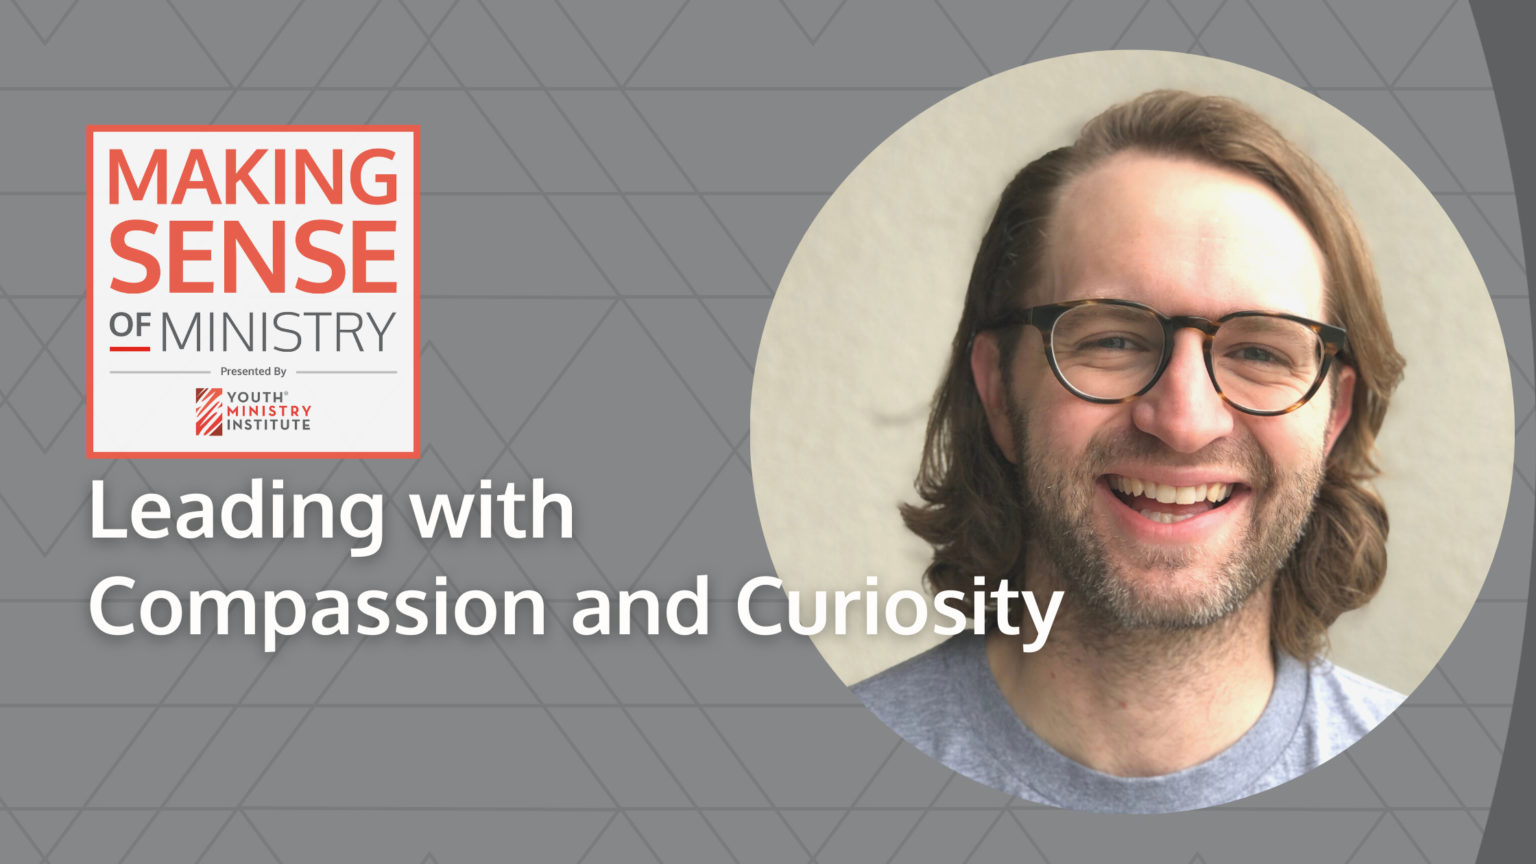 Josh French on the Making Sense of Ministry Podcast